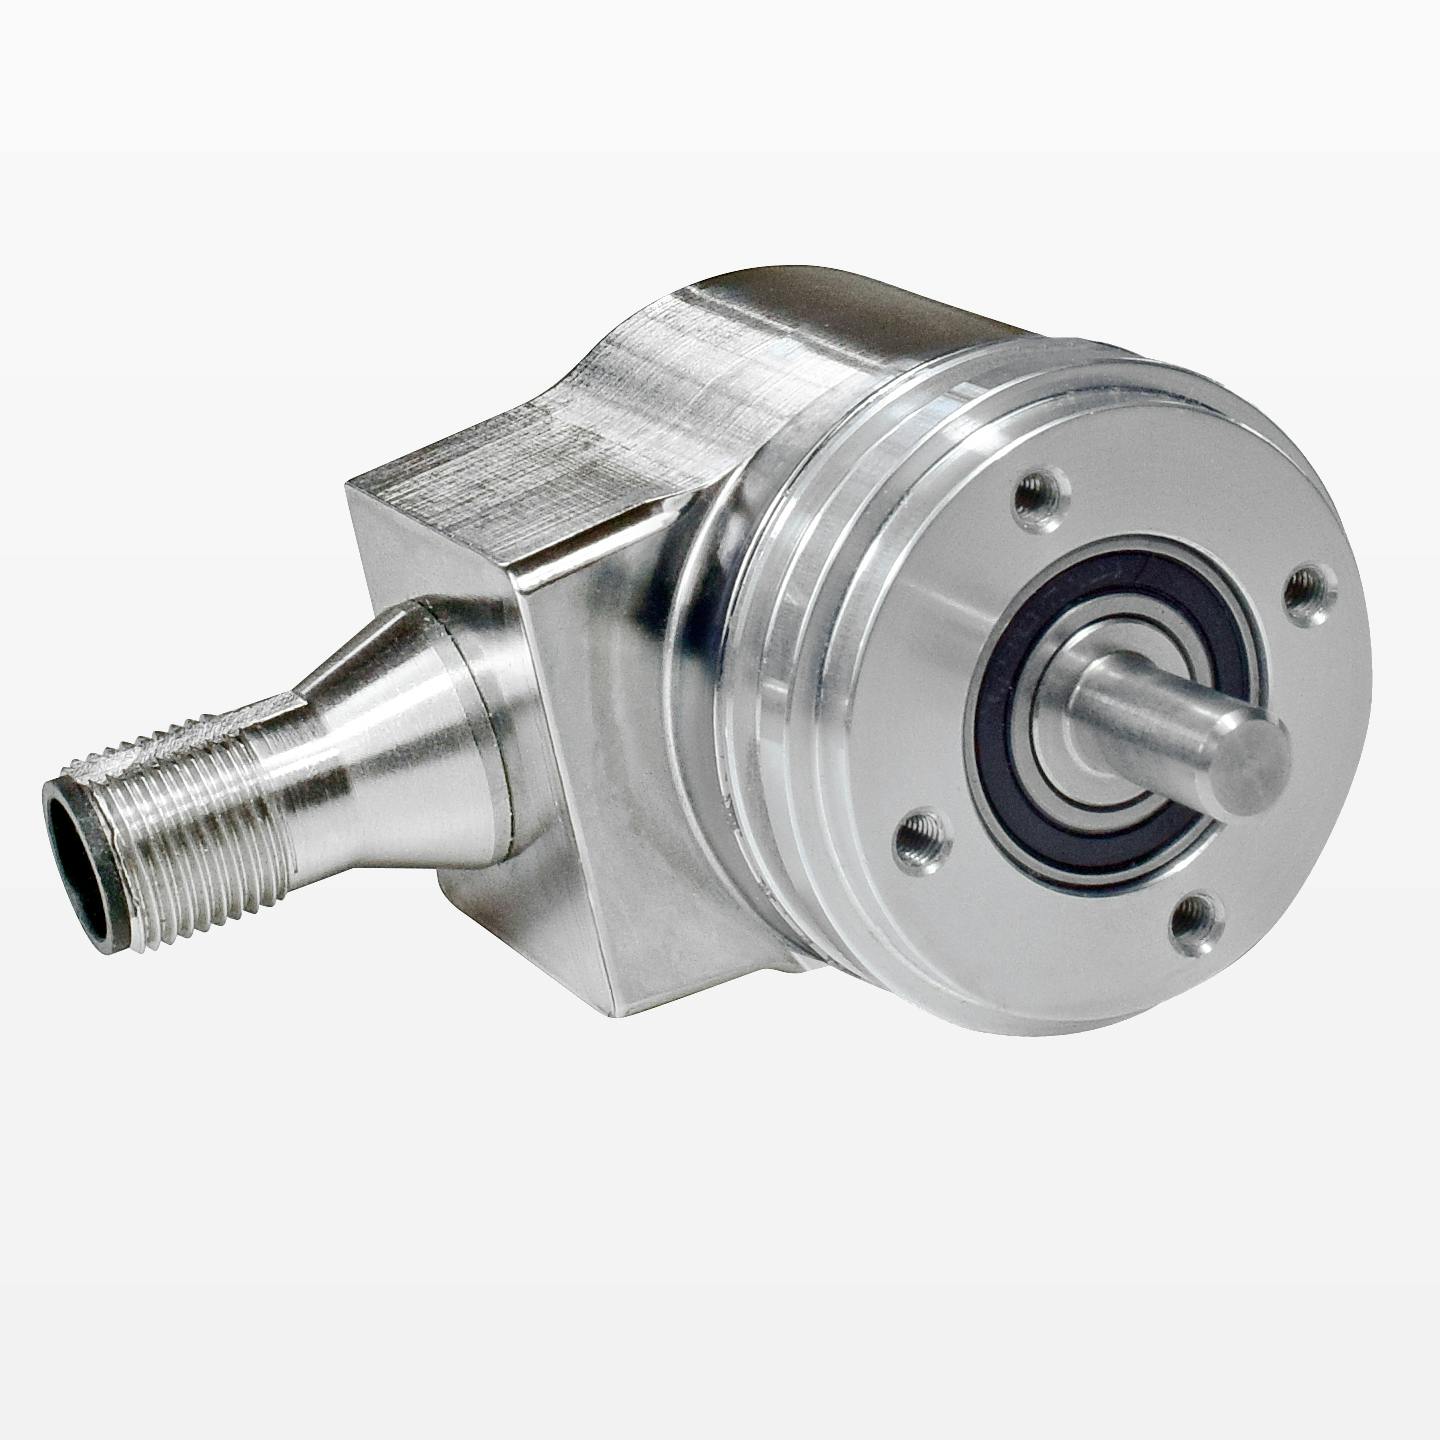 P 1059 rotary encoder with grey background